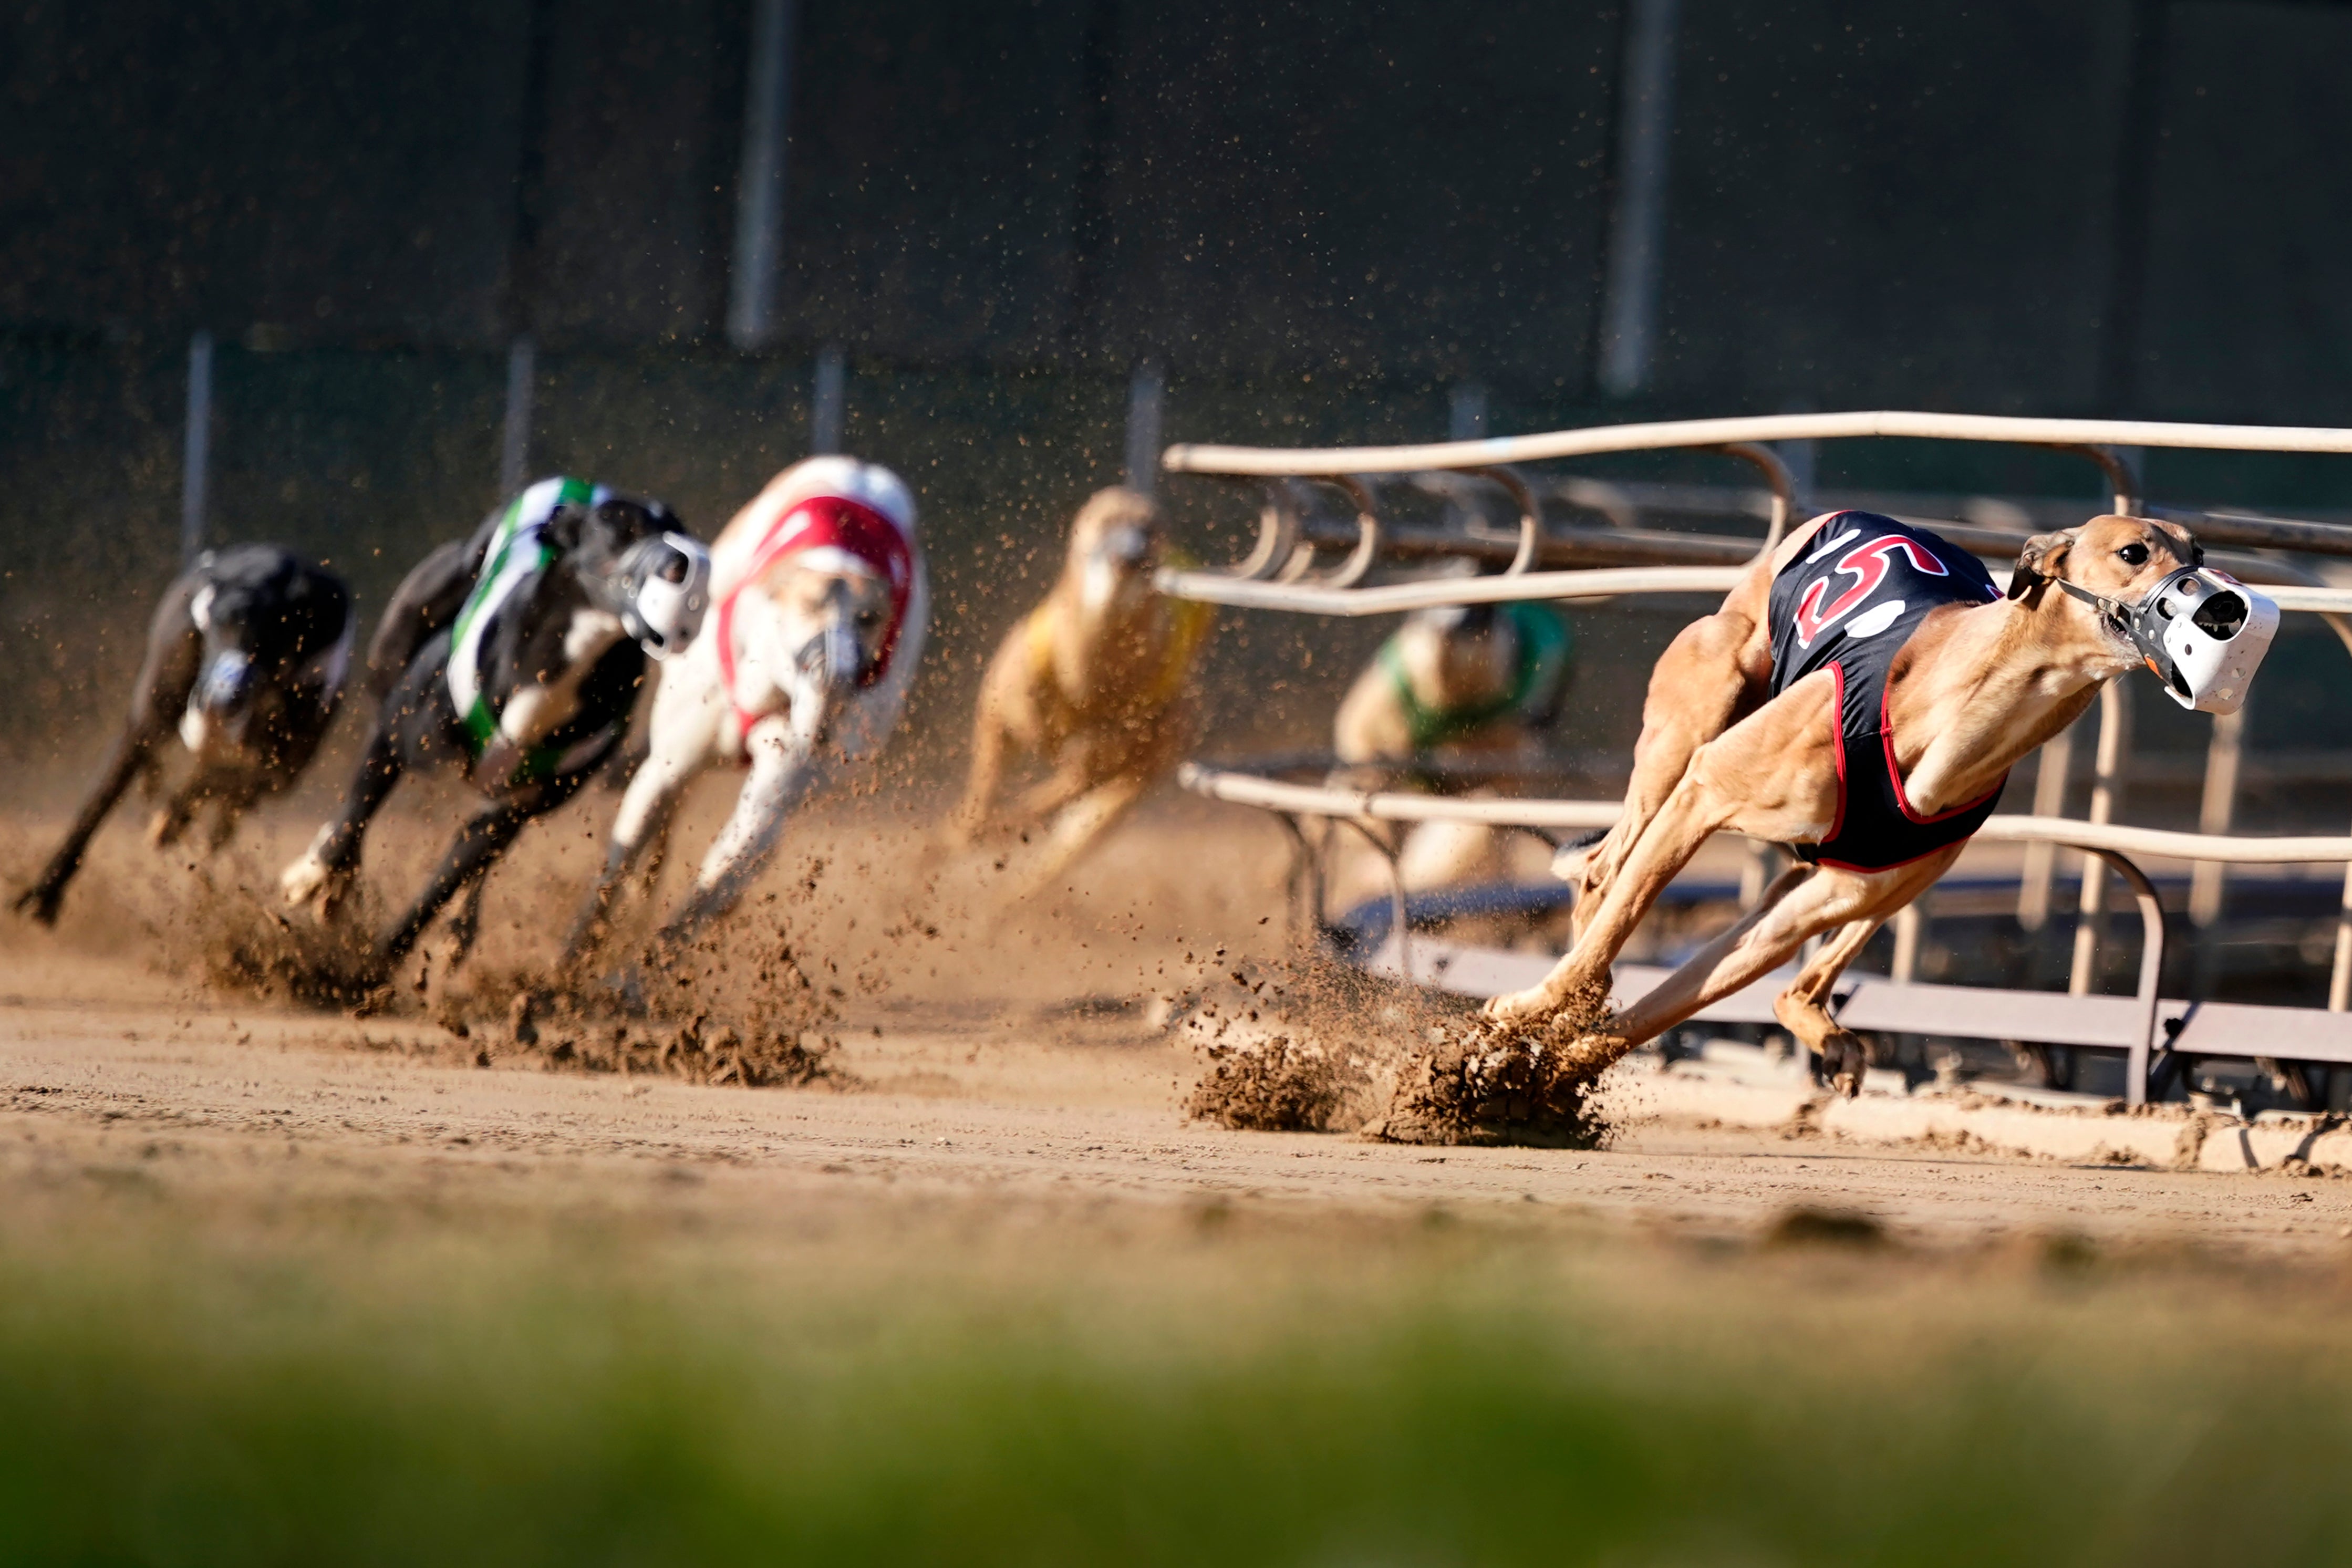 Greyhounds compete in a race at the Iowa Greyhound Park, Saturday, April 16, 2022, in Dubuque, Iowa